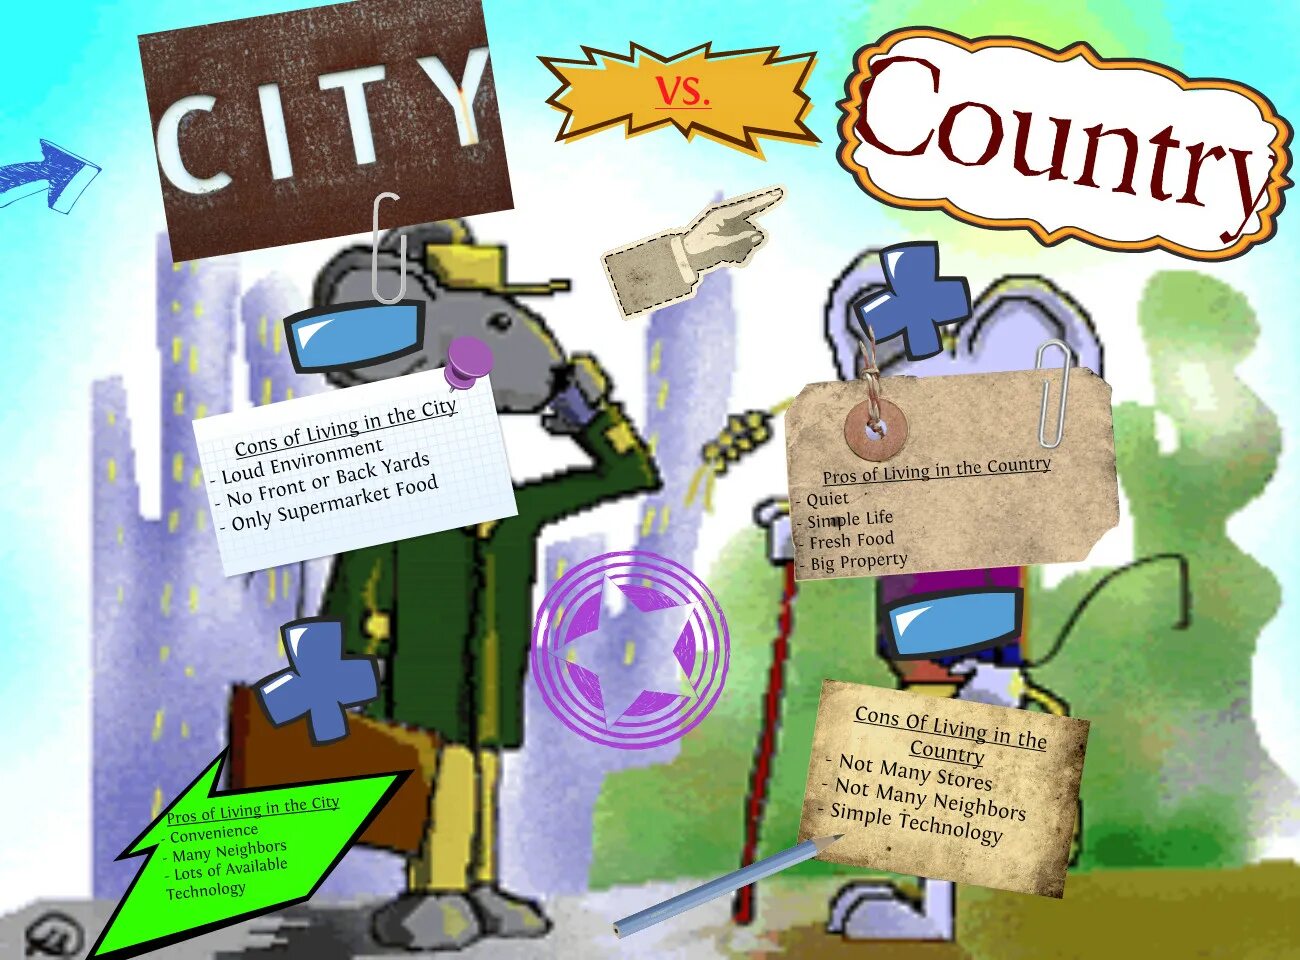 City Life coutrylife. City Life and Country Life. City Life versus Country Life. City Life vs Country Life.